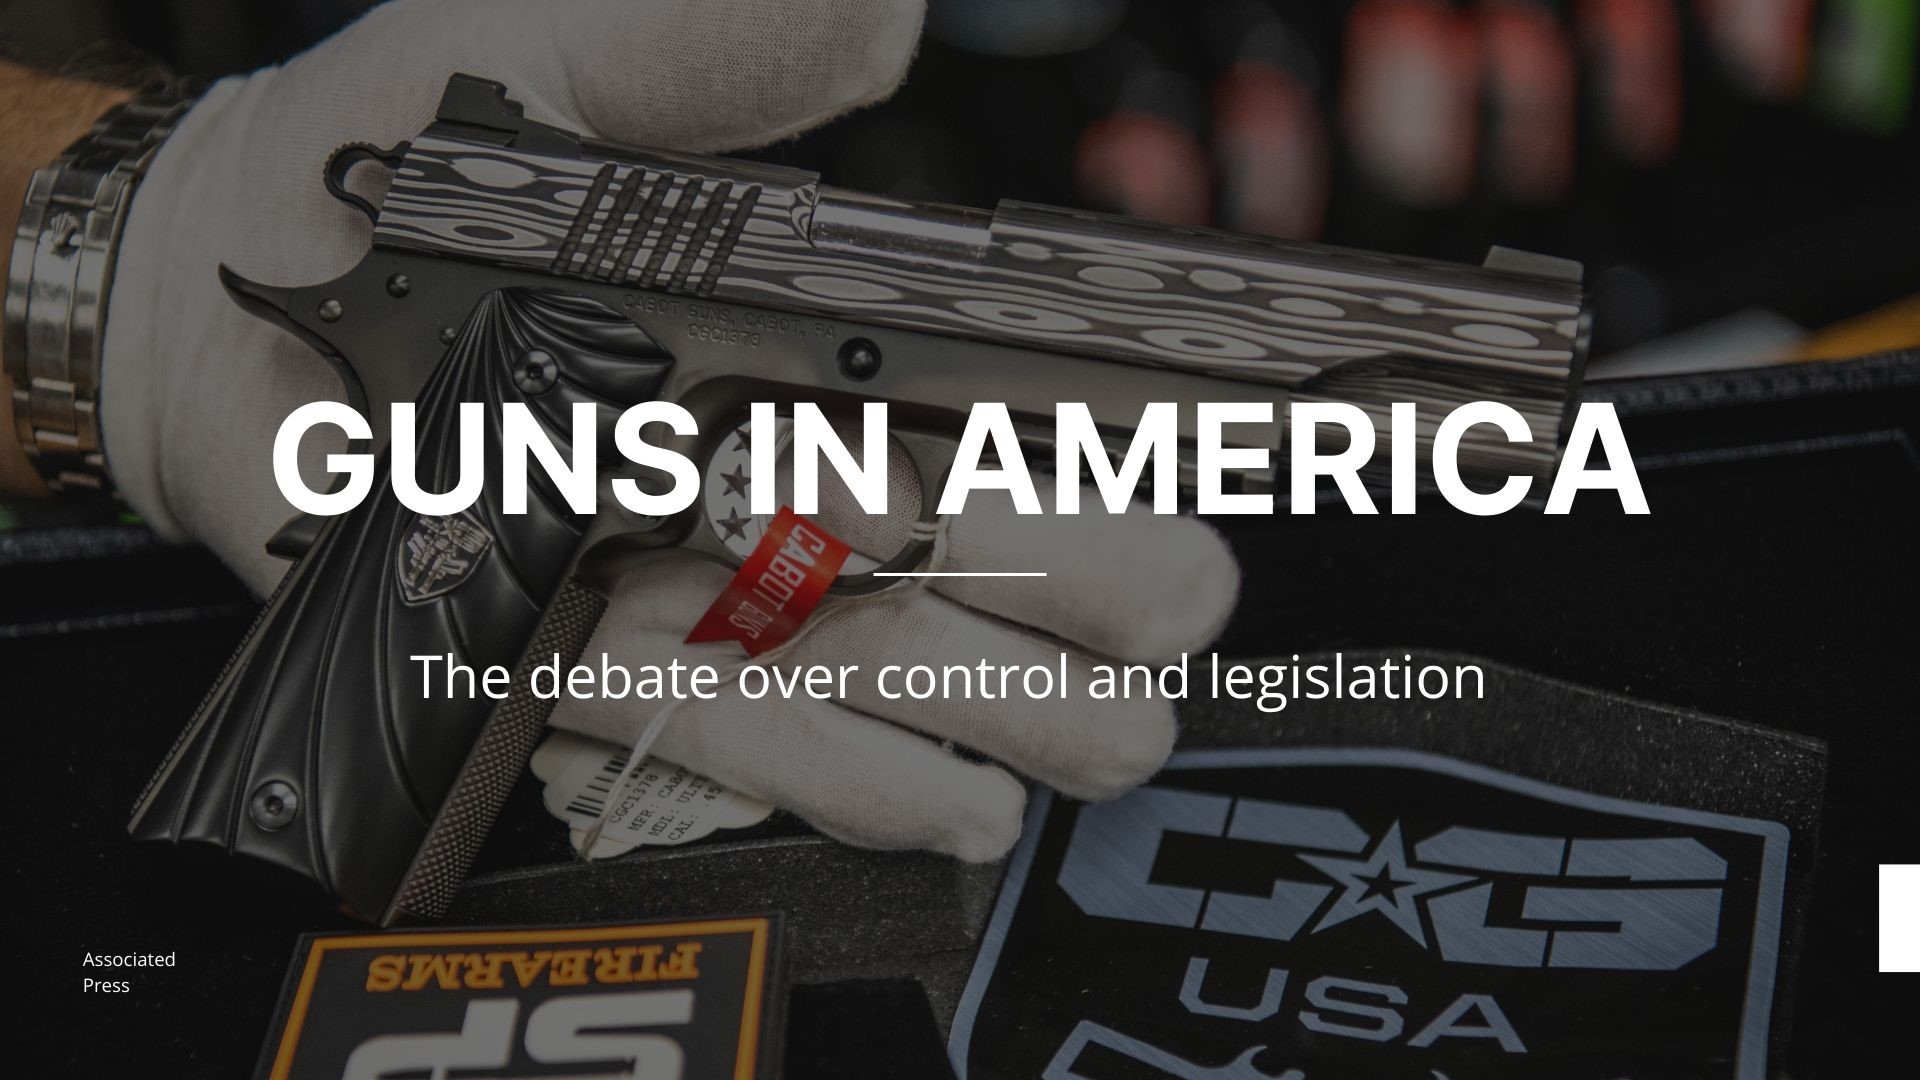 Verifying facts about federal gun legislation as the country remains divided on the subject of gun control.